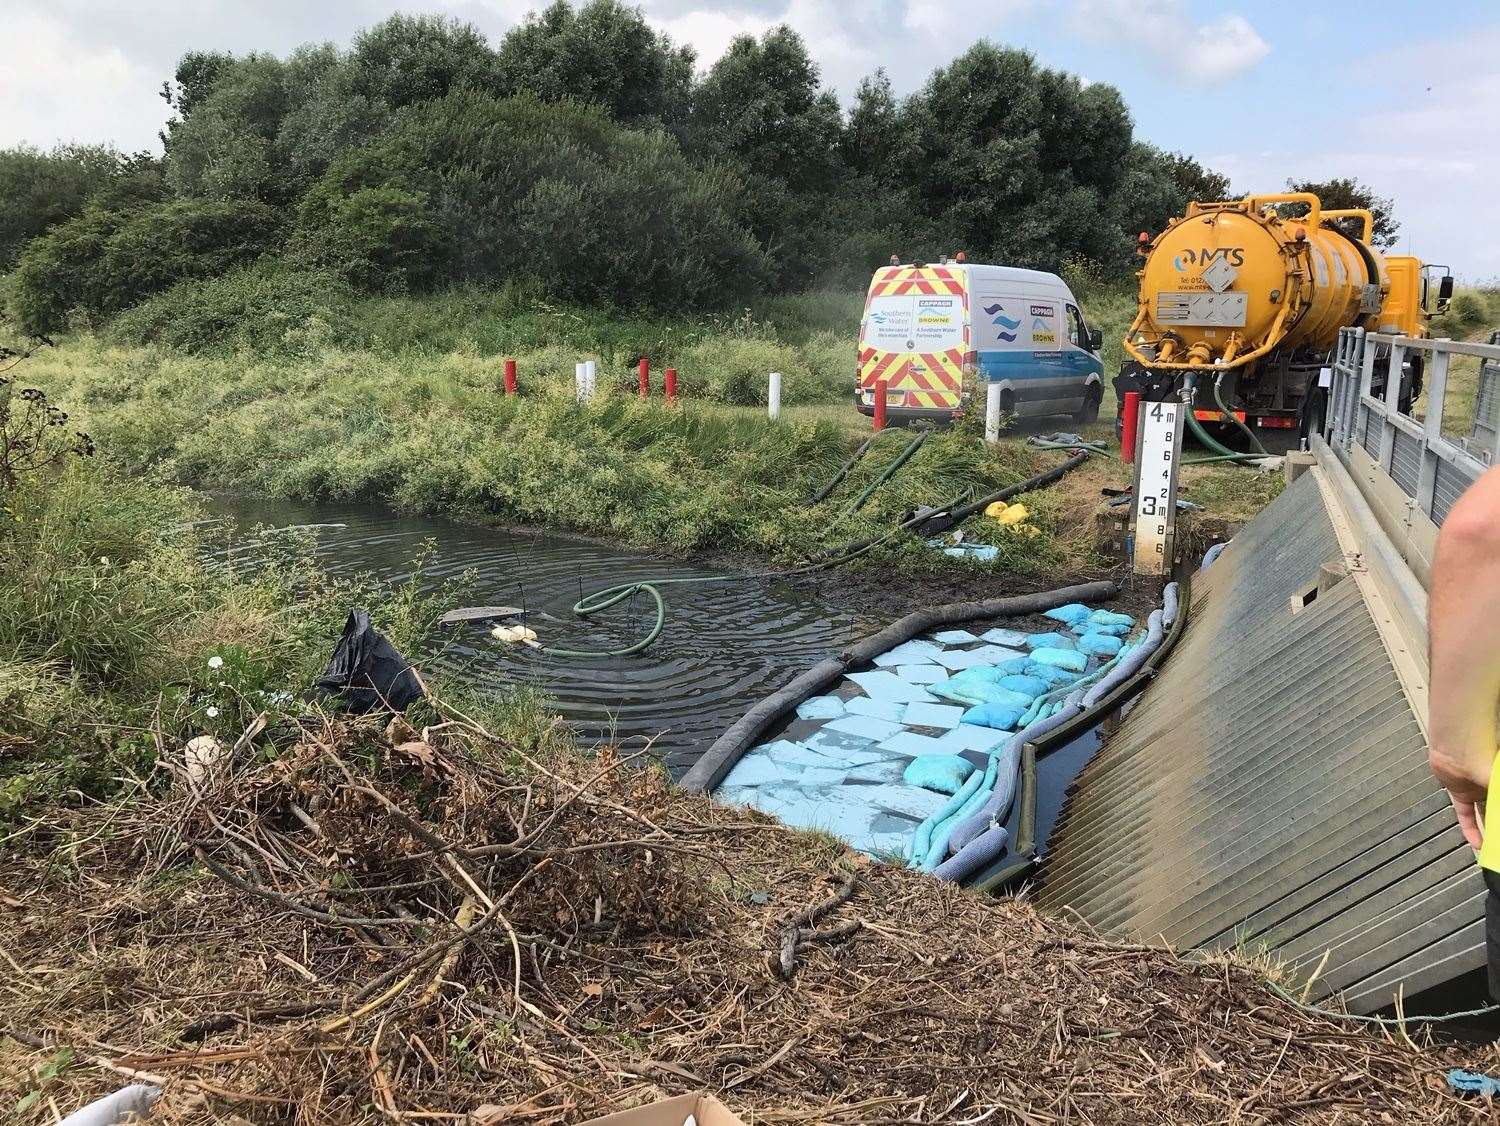 Southern Water claimed responsibility for a diesel spillage at Swalecliffe Brook - located between Whitstable and Herne Bay - in 2019 at the company's treatment works. Picture: Environment Agency